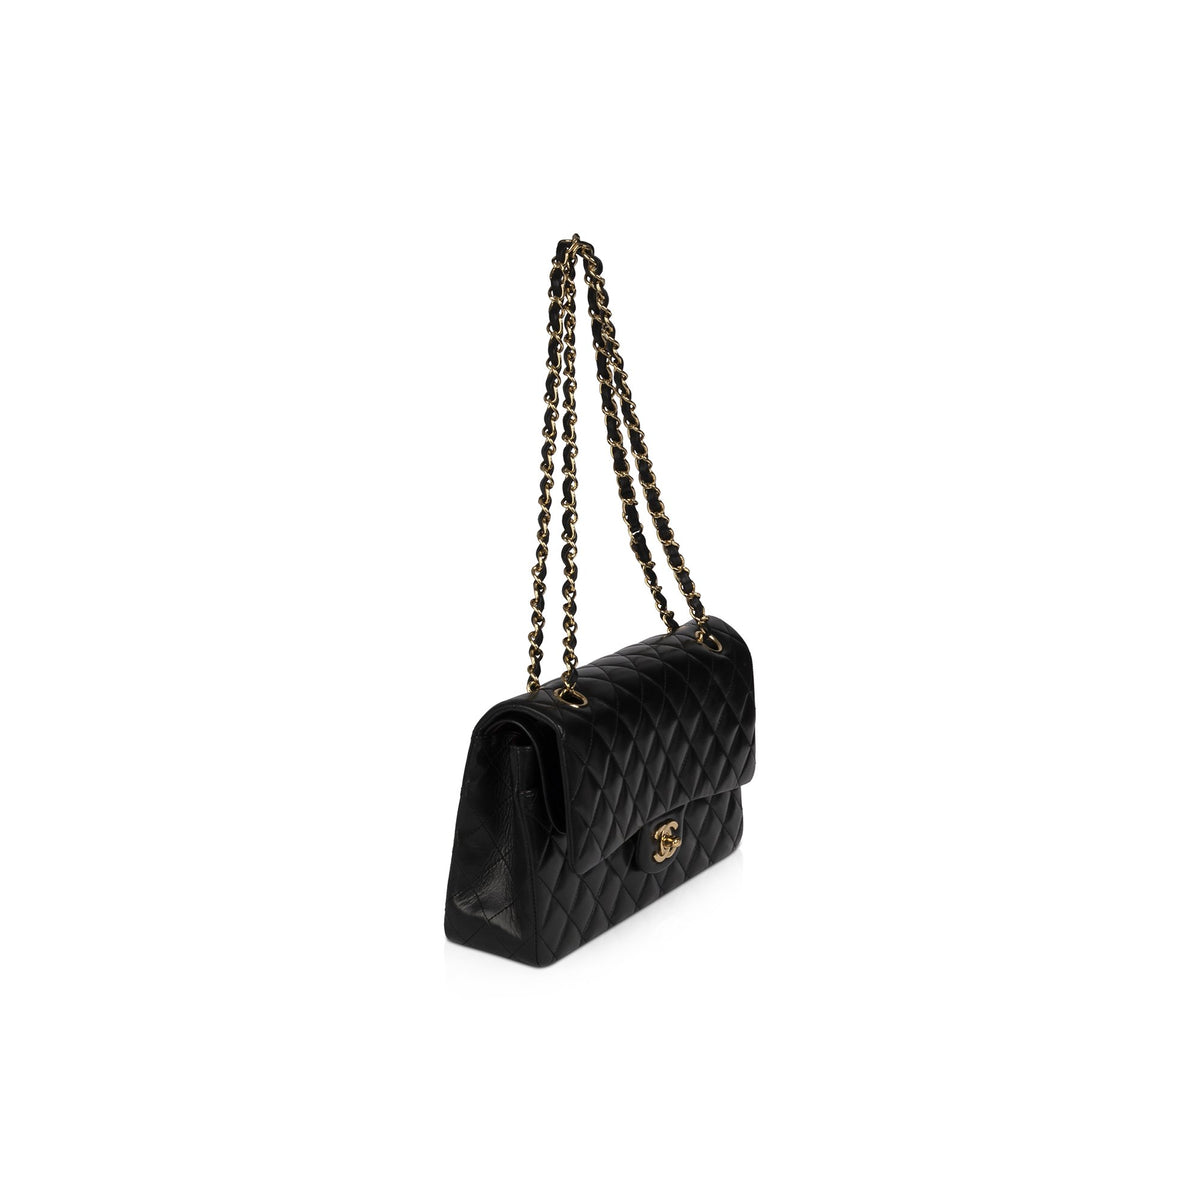 Explore our extensive assortment of Chanel Black Lambskin Medium Classic  Double Flap Bag w/ Authenticity Card & Box Chanel items at affordable cost